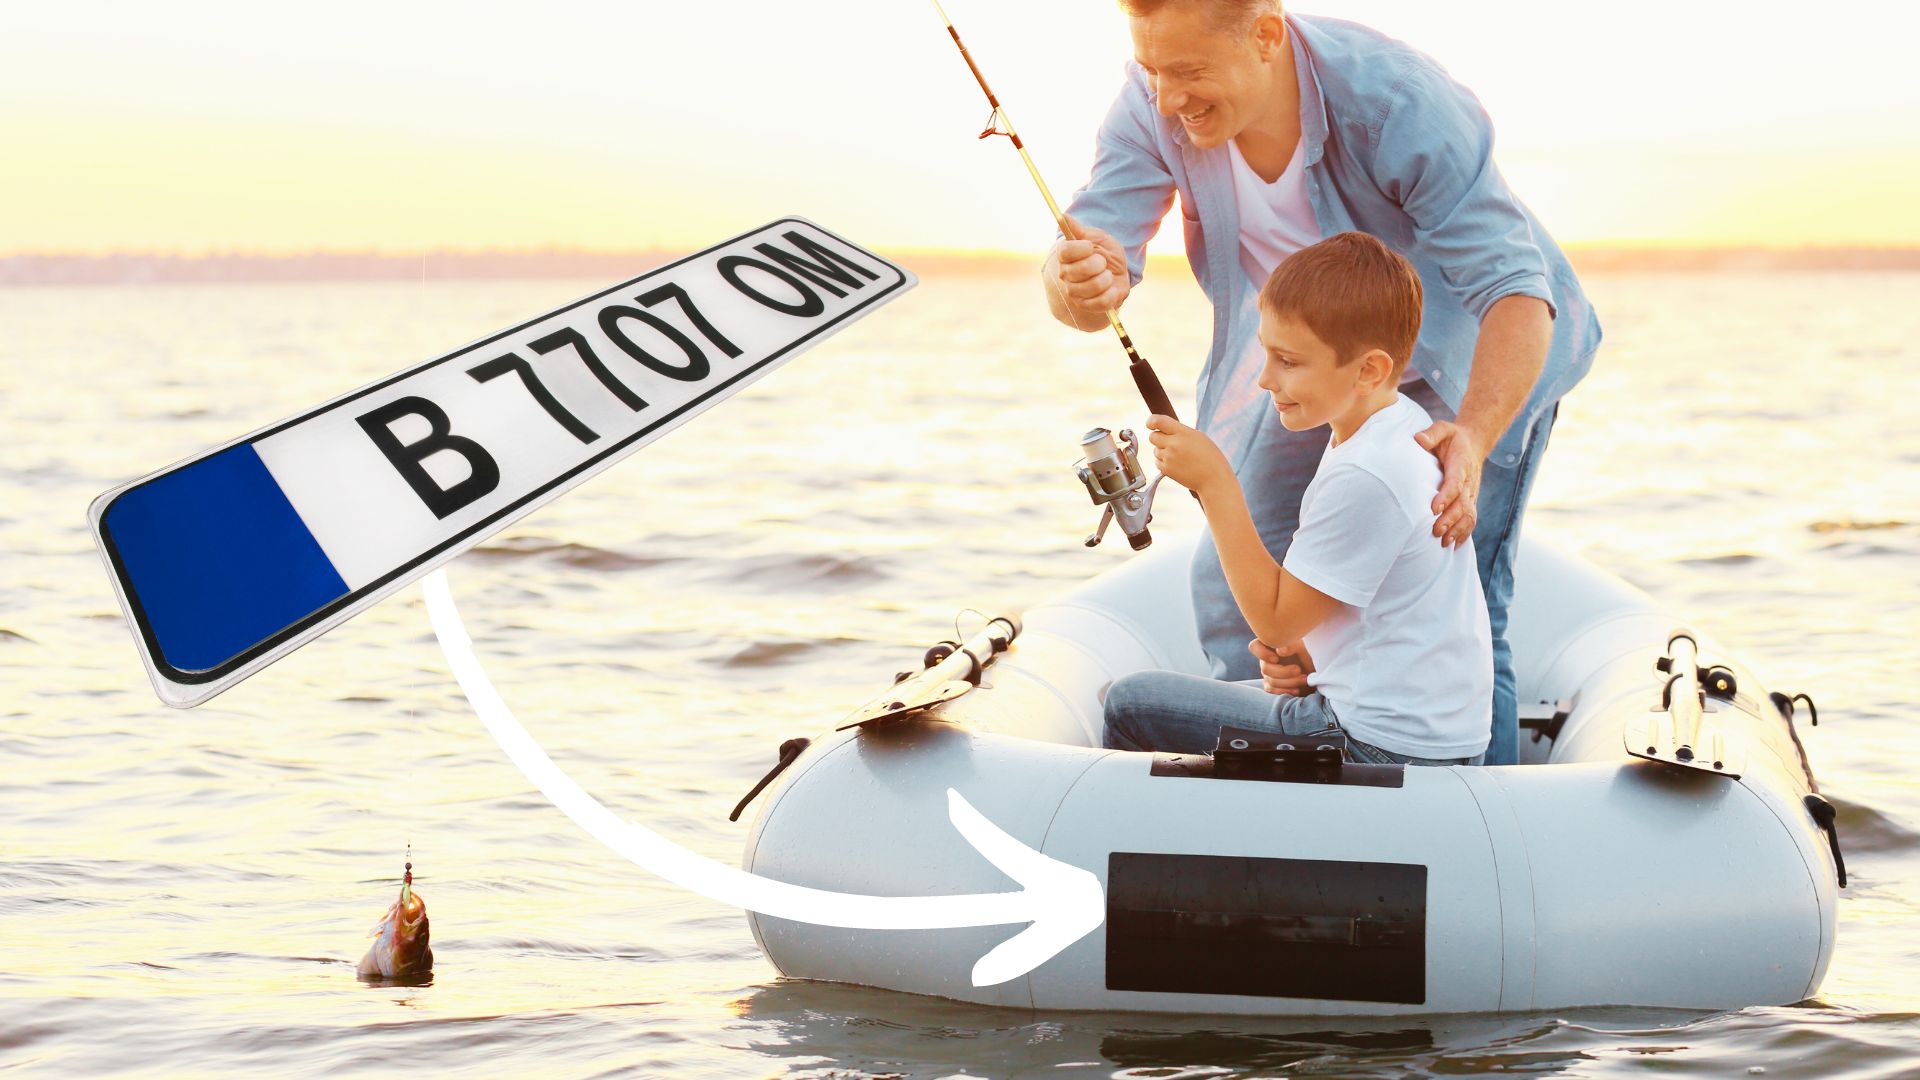 how to put registration numbers on inflatable boats